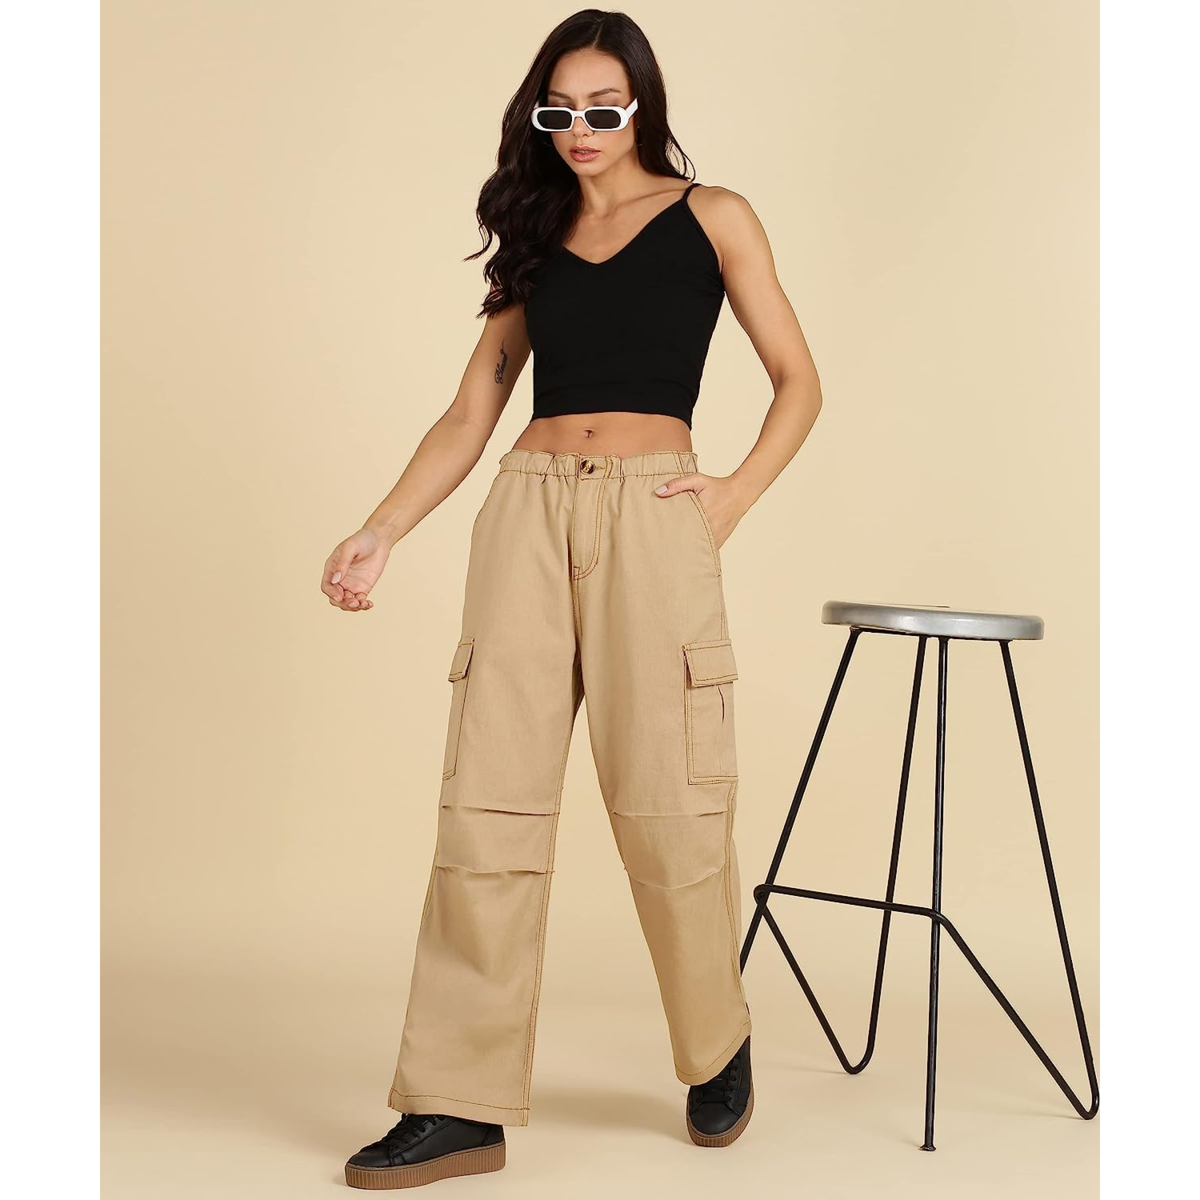 Women's Cargo Pants With High Waist  Pants for women, Cargo pants women,  Women cargos